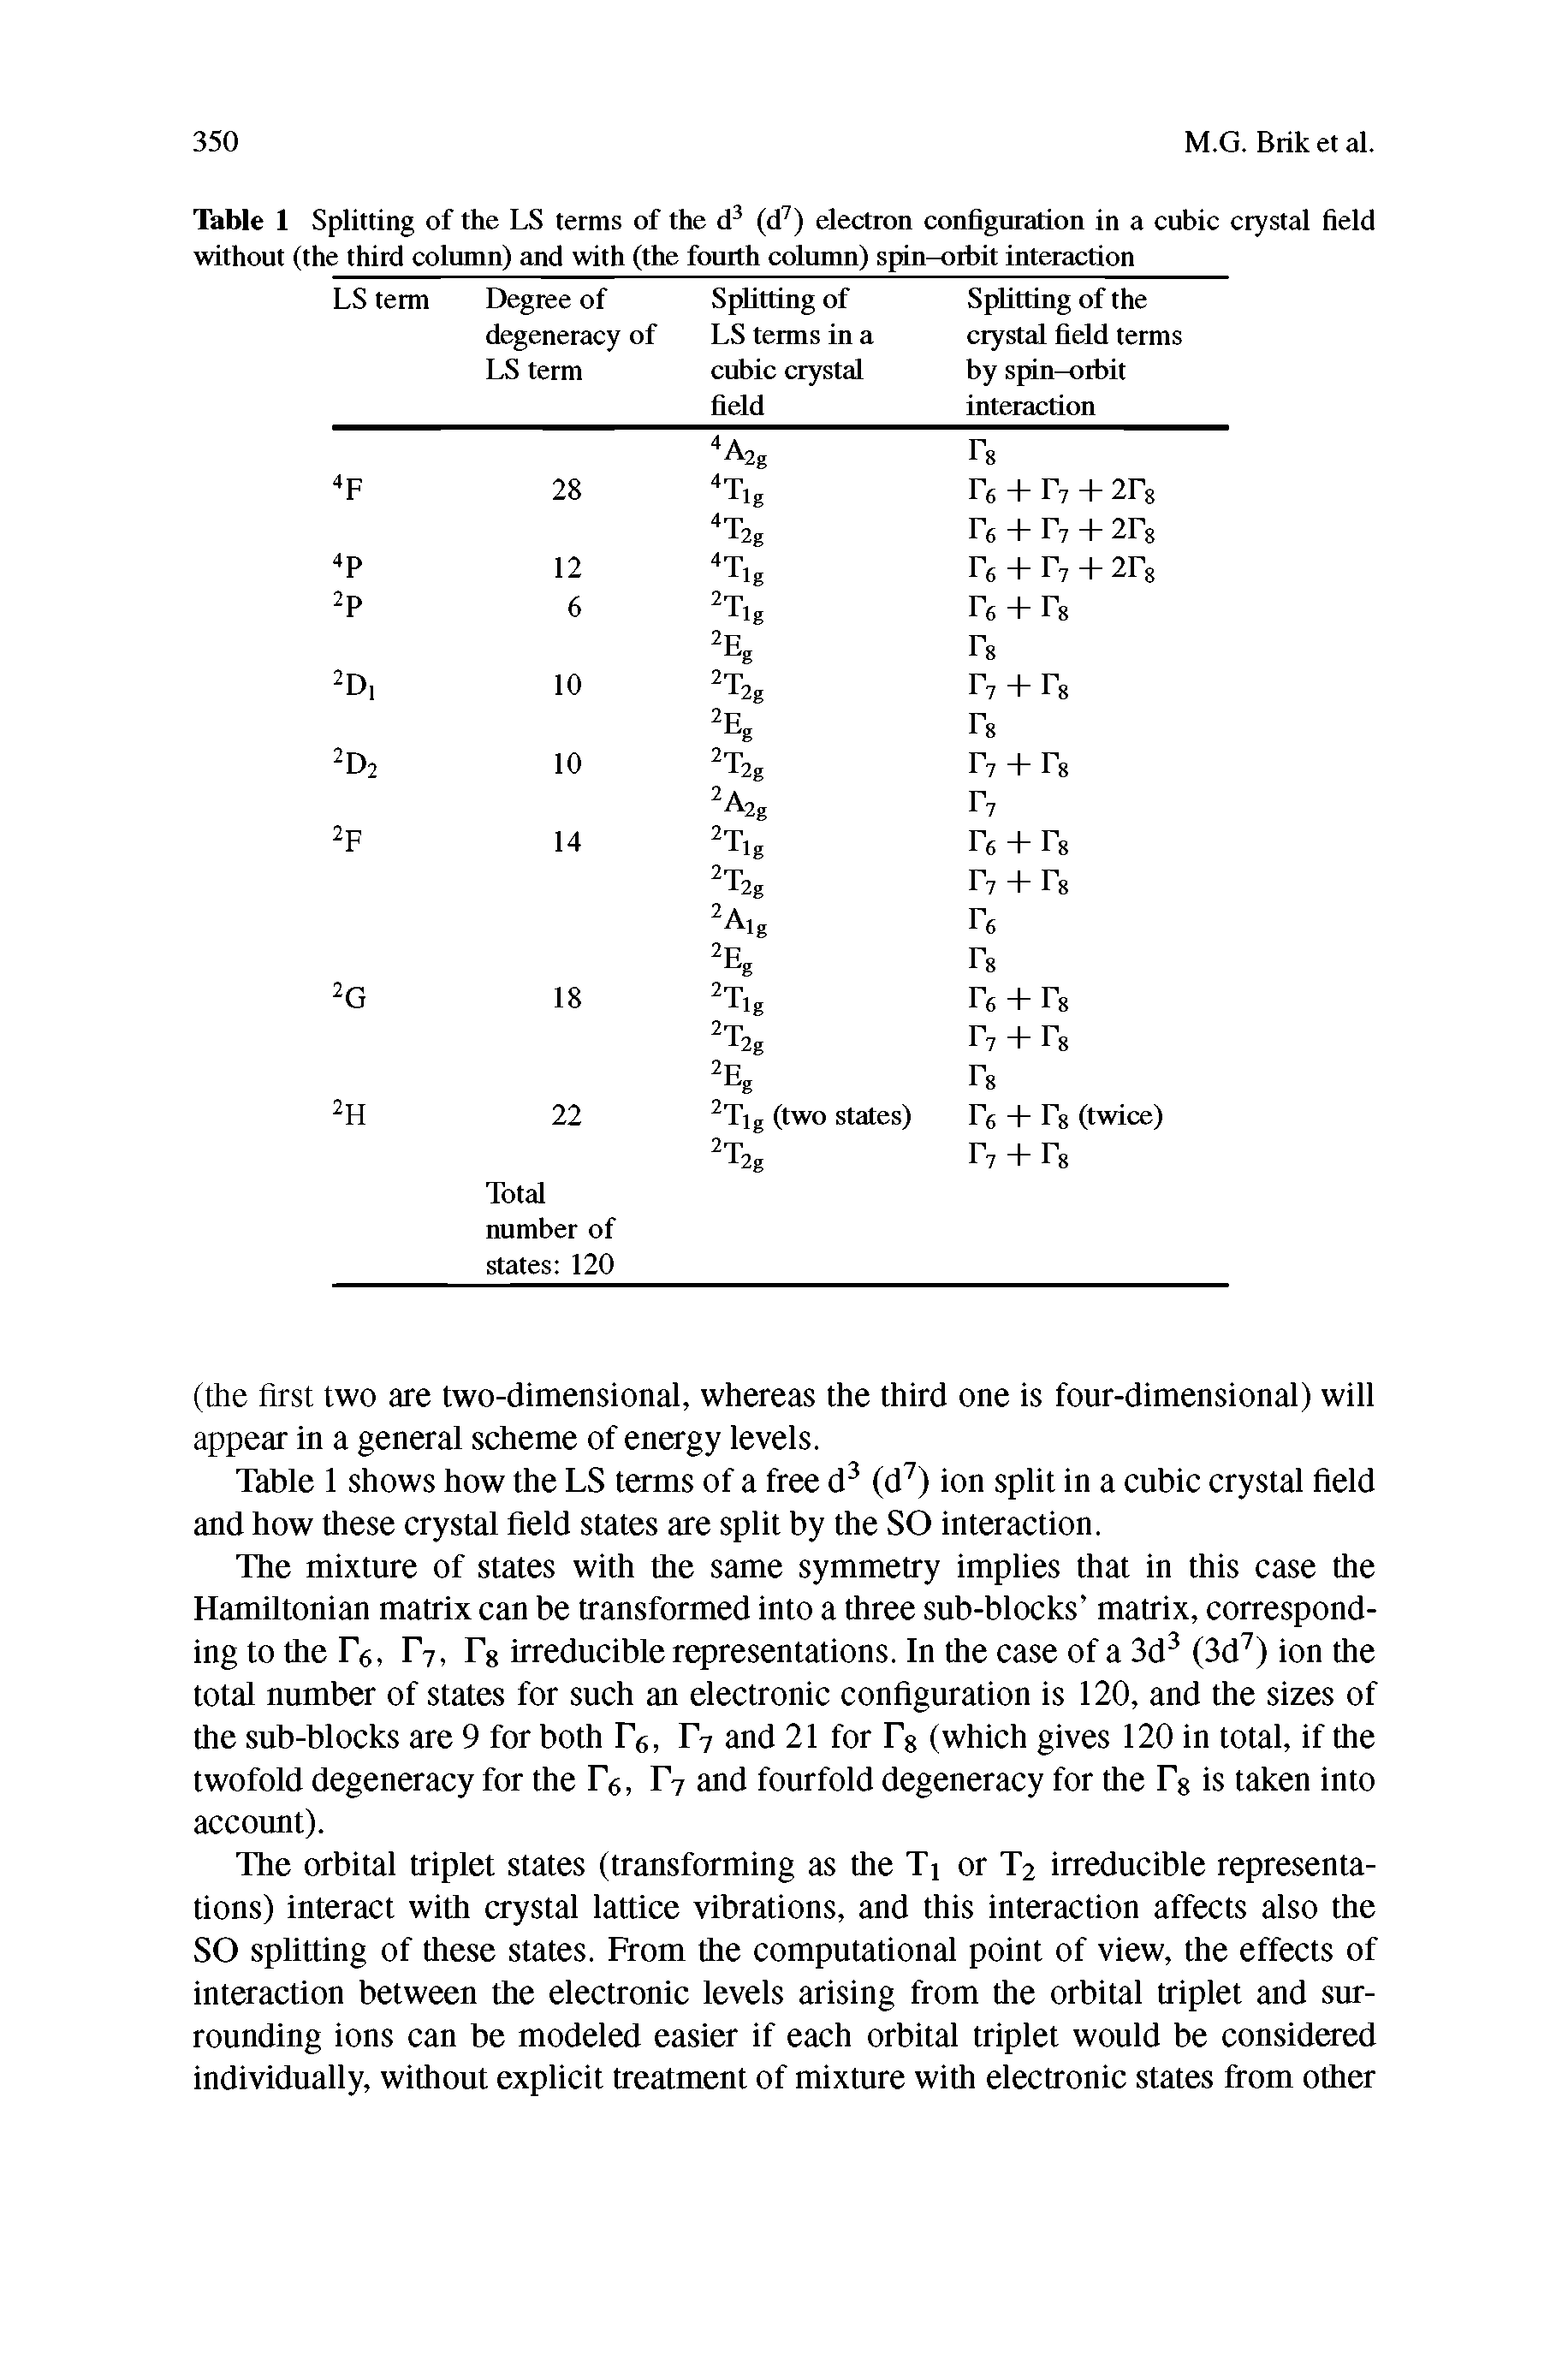 Table 1 Splitting of the LS terms of the (d ) electron configuration in a cubic crystal field without (the third column) and with (the fourth column) spin-orbit interaction...